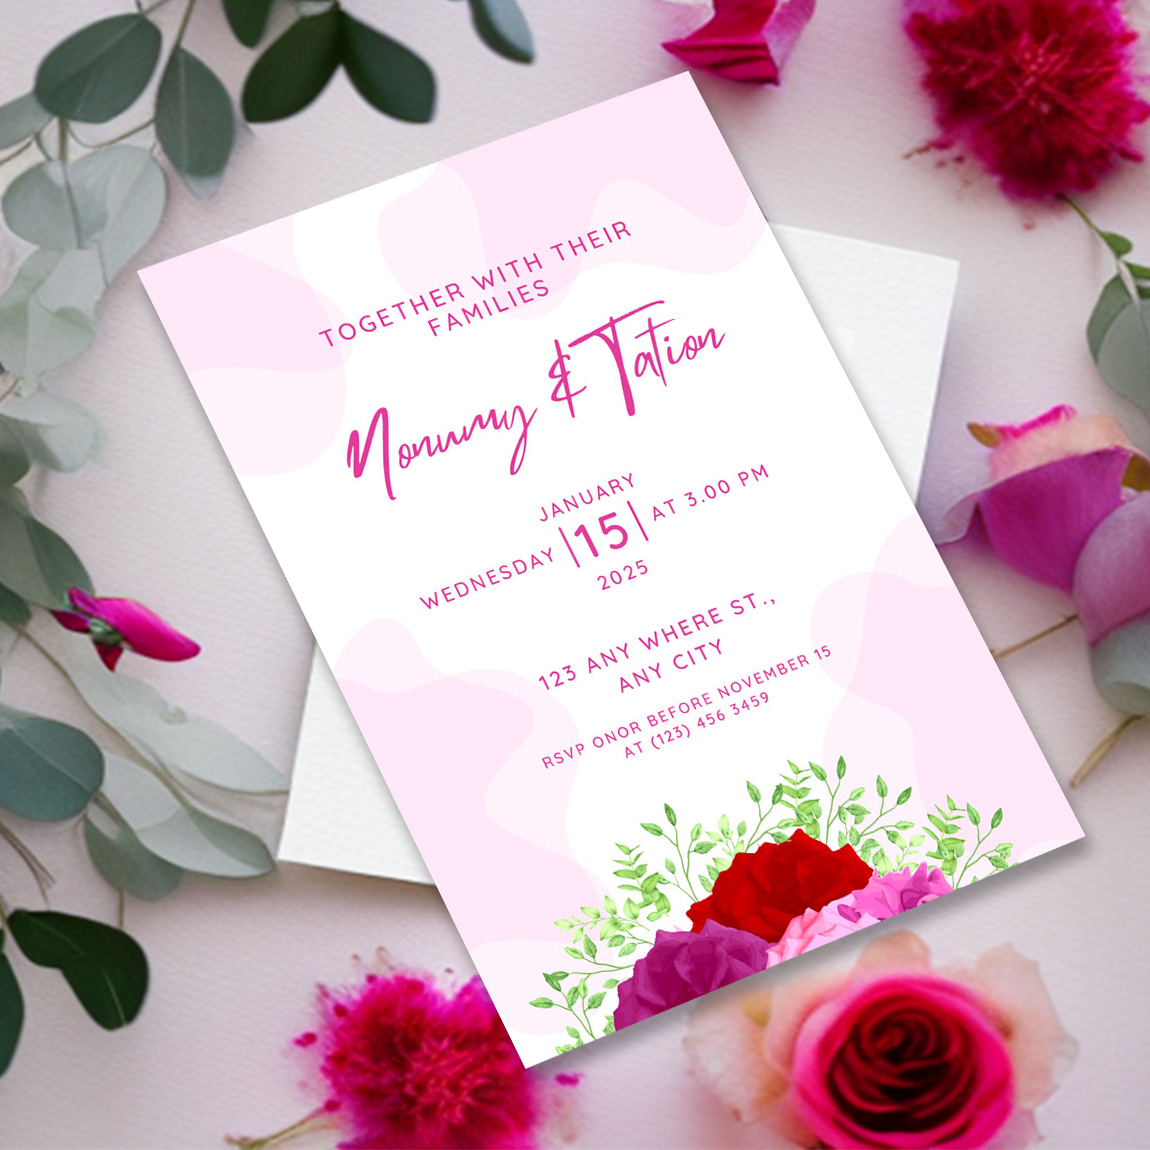 Image of irresistible wedding invitation with flowers.